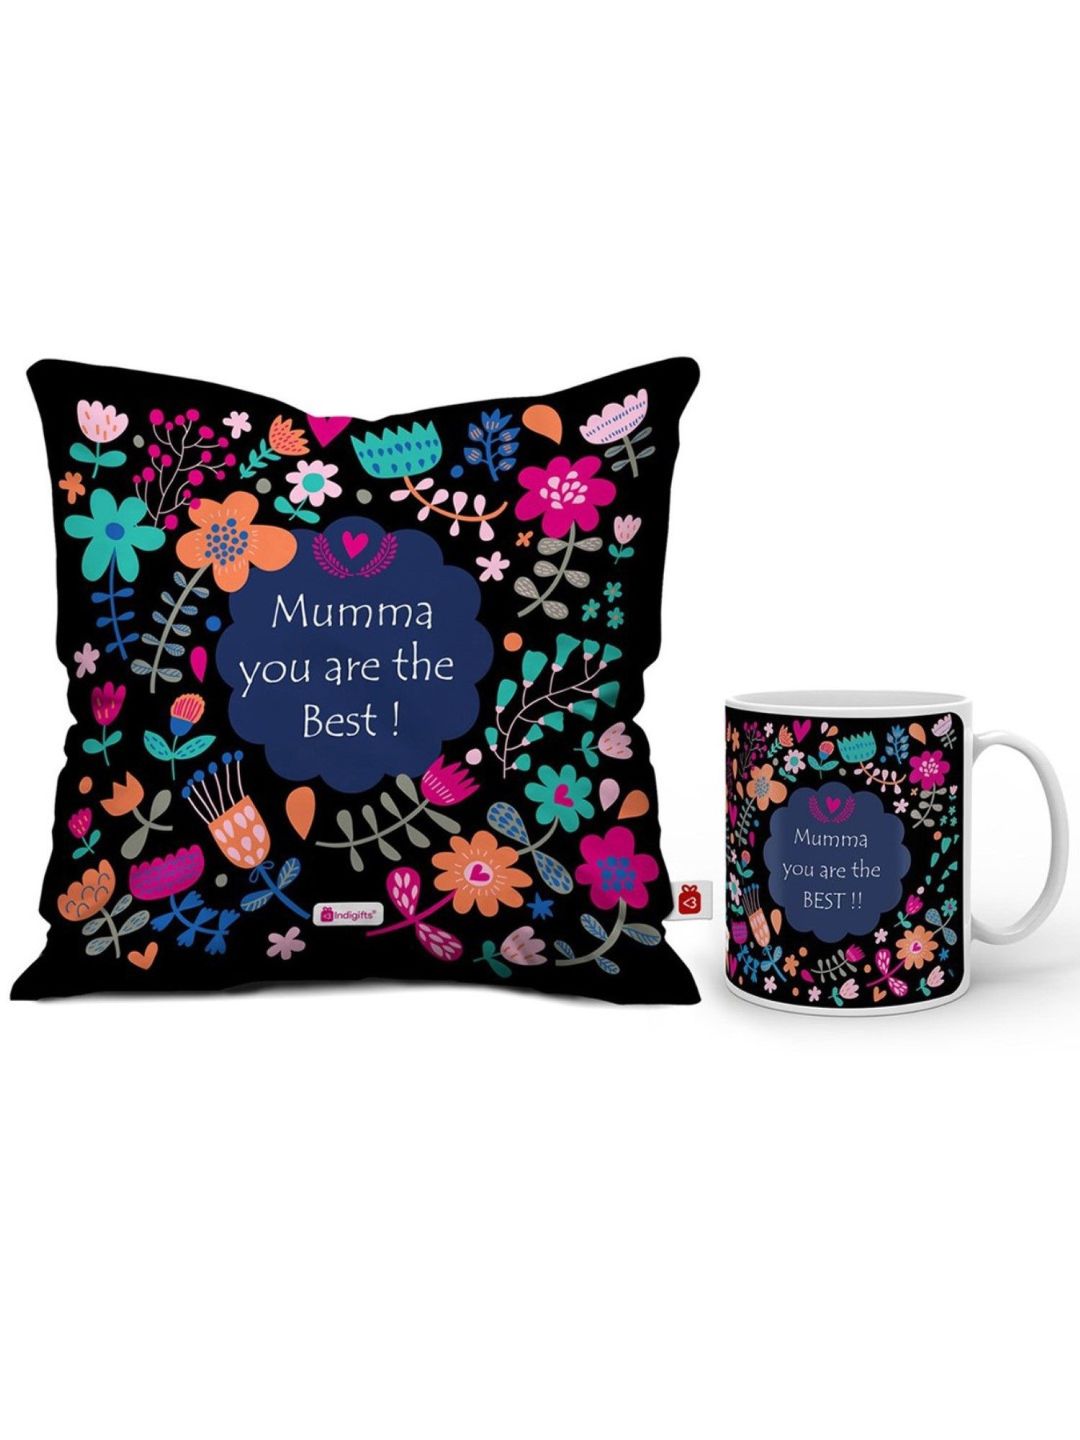 Indigifts Satin Mug and Cushion Cover with Filler – 1 Mug 1 Cushion Cover| 12×12 inches| 1 Pack Filler | MATERIAL – CUSHION : Soft Poly Satin| Black Colored Cotton Overlap Envelop Backing